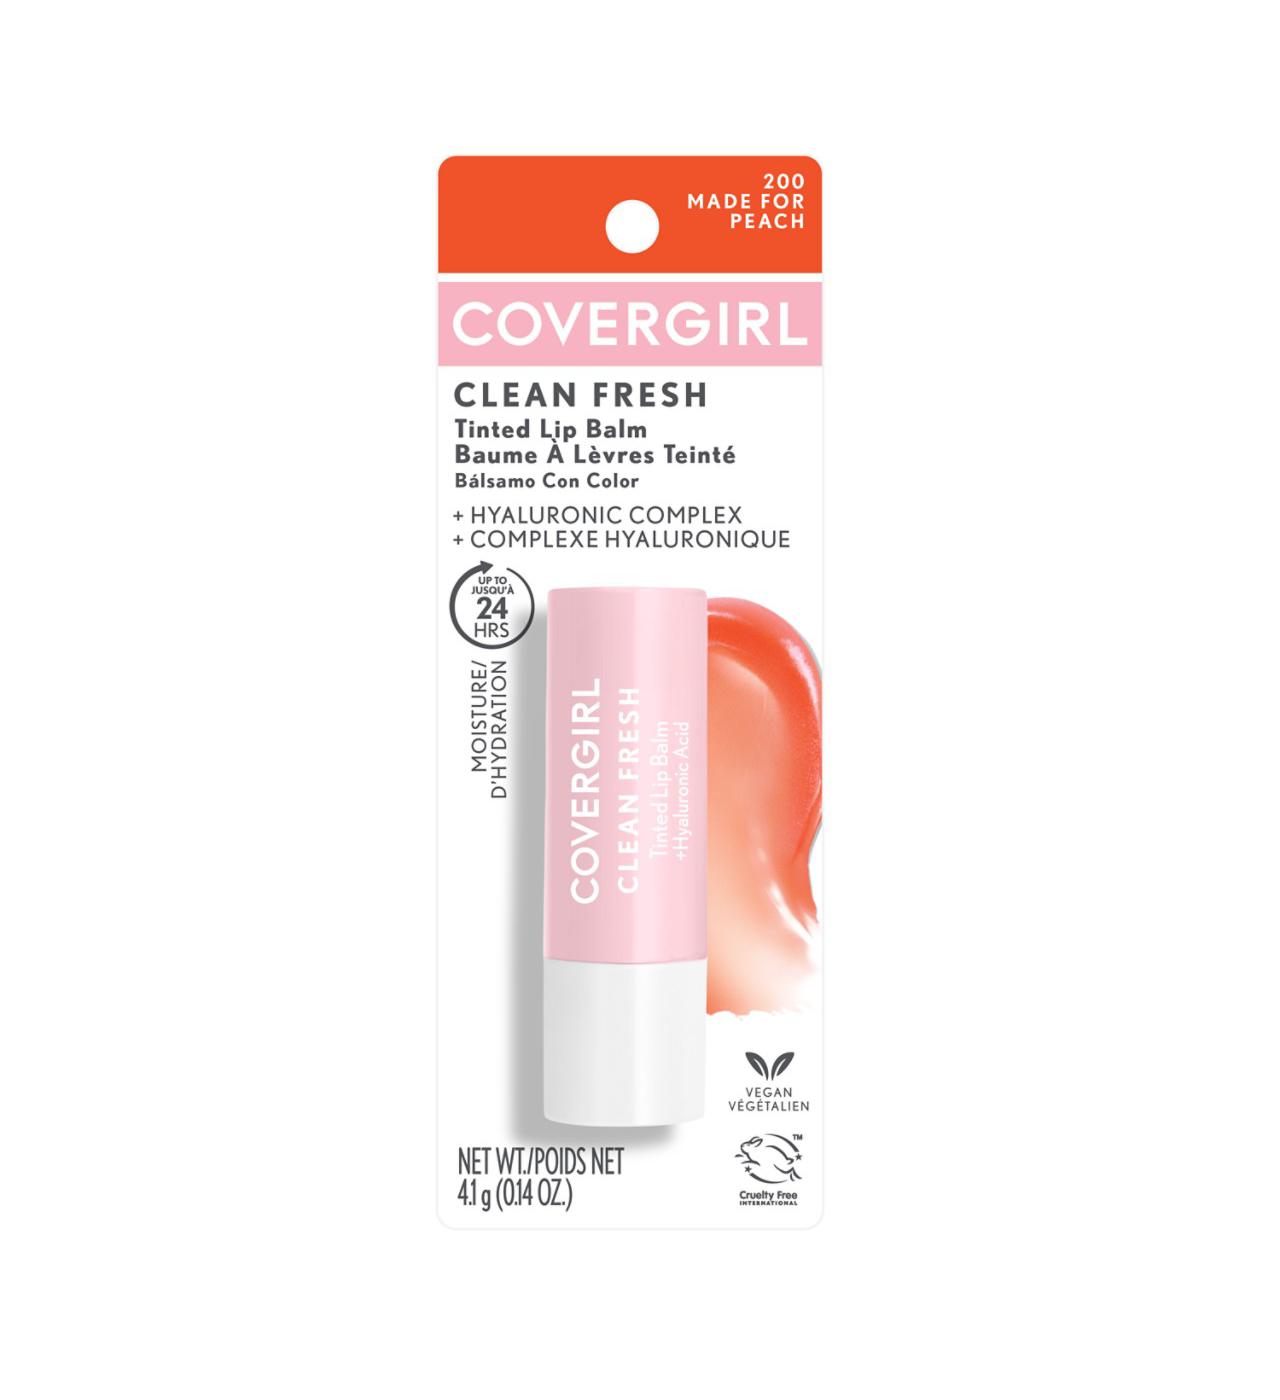 Covergirl Clean Fresh Tinted Lip Balm - Made For Peach; image 1 of 2